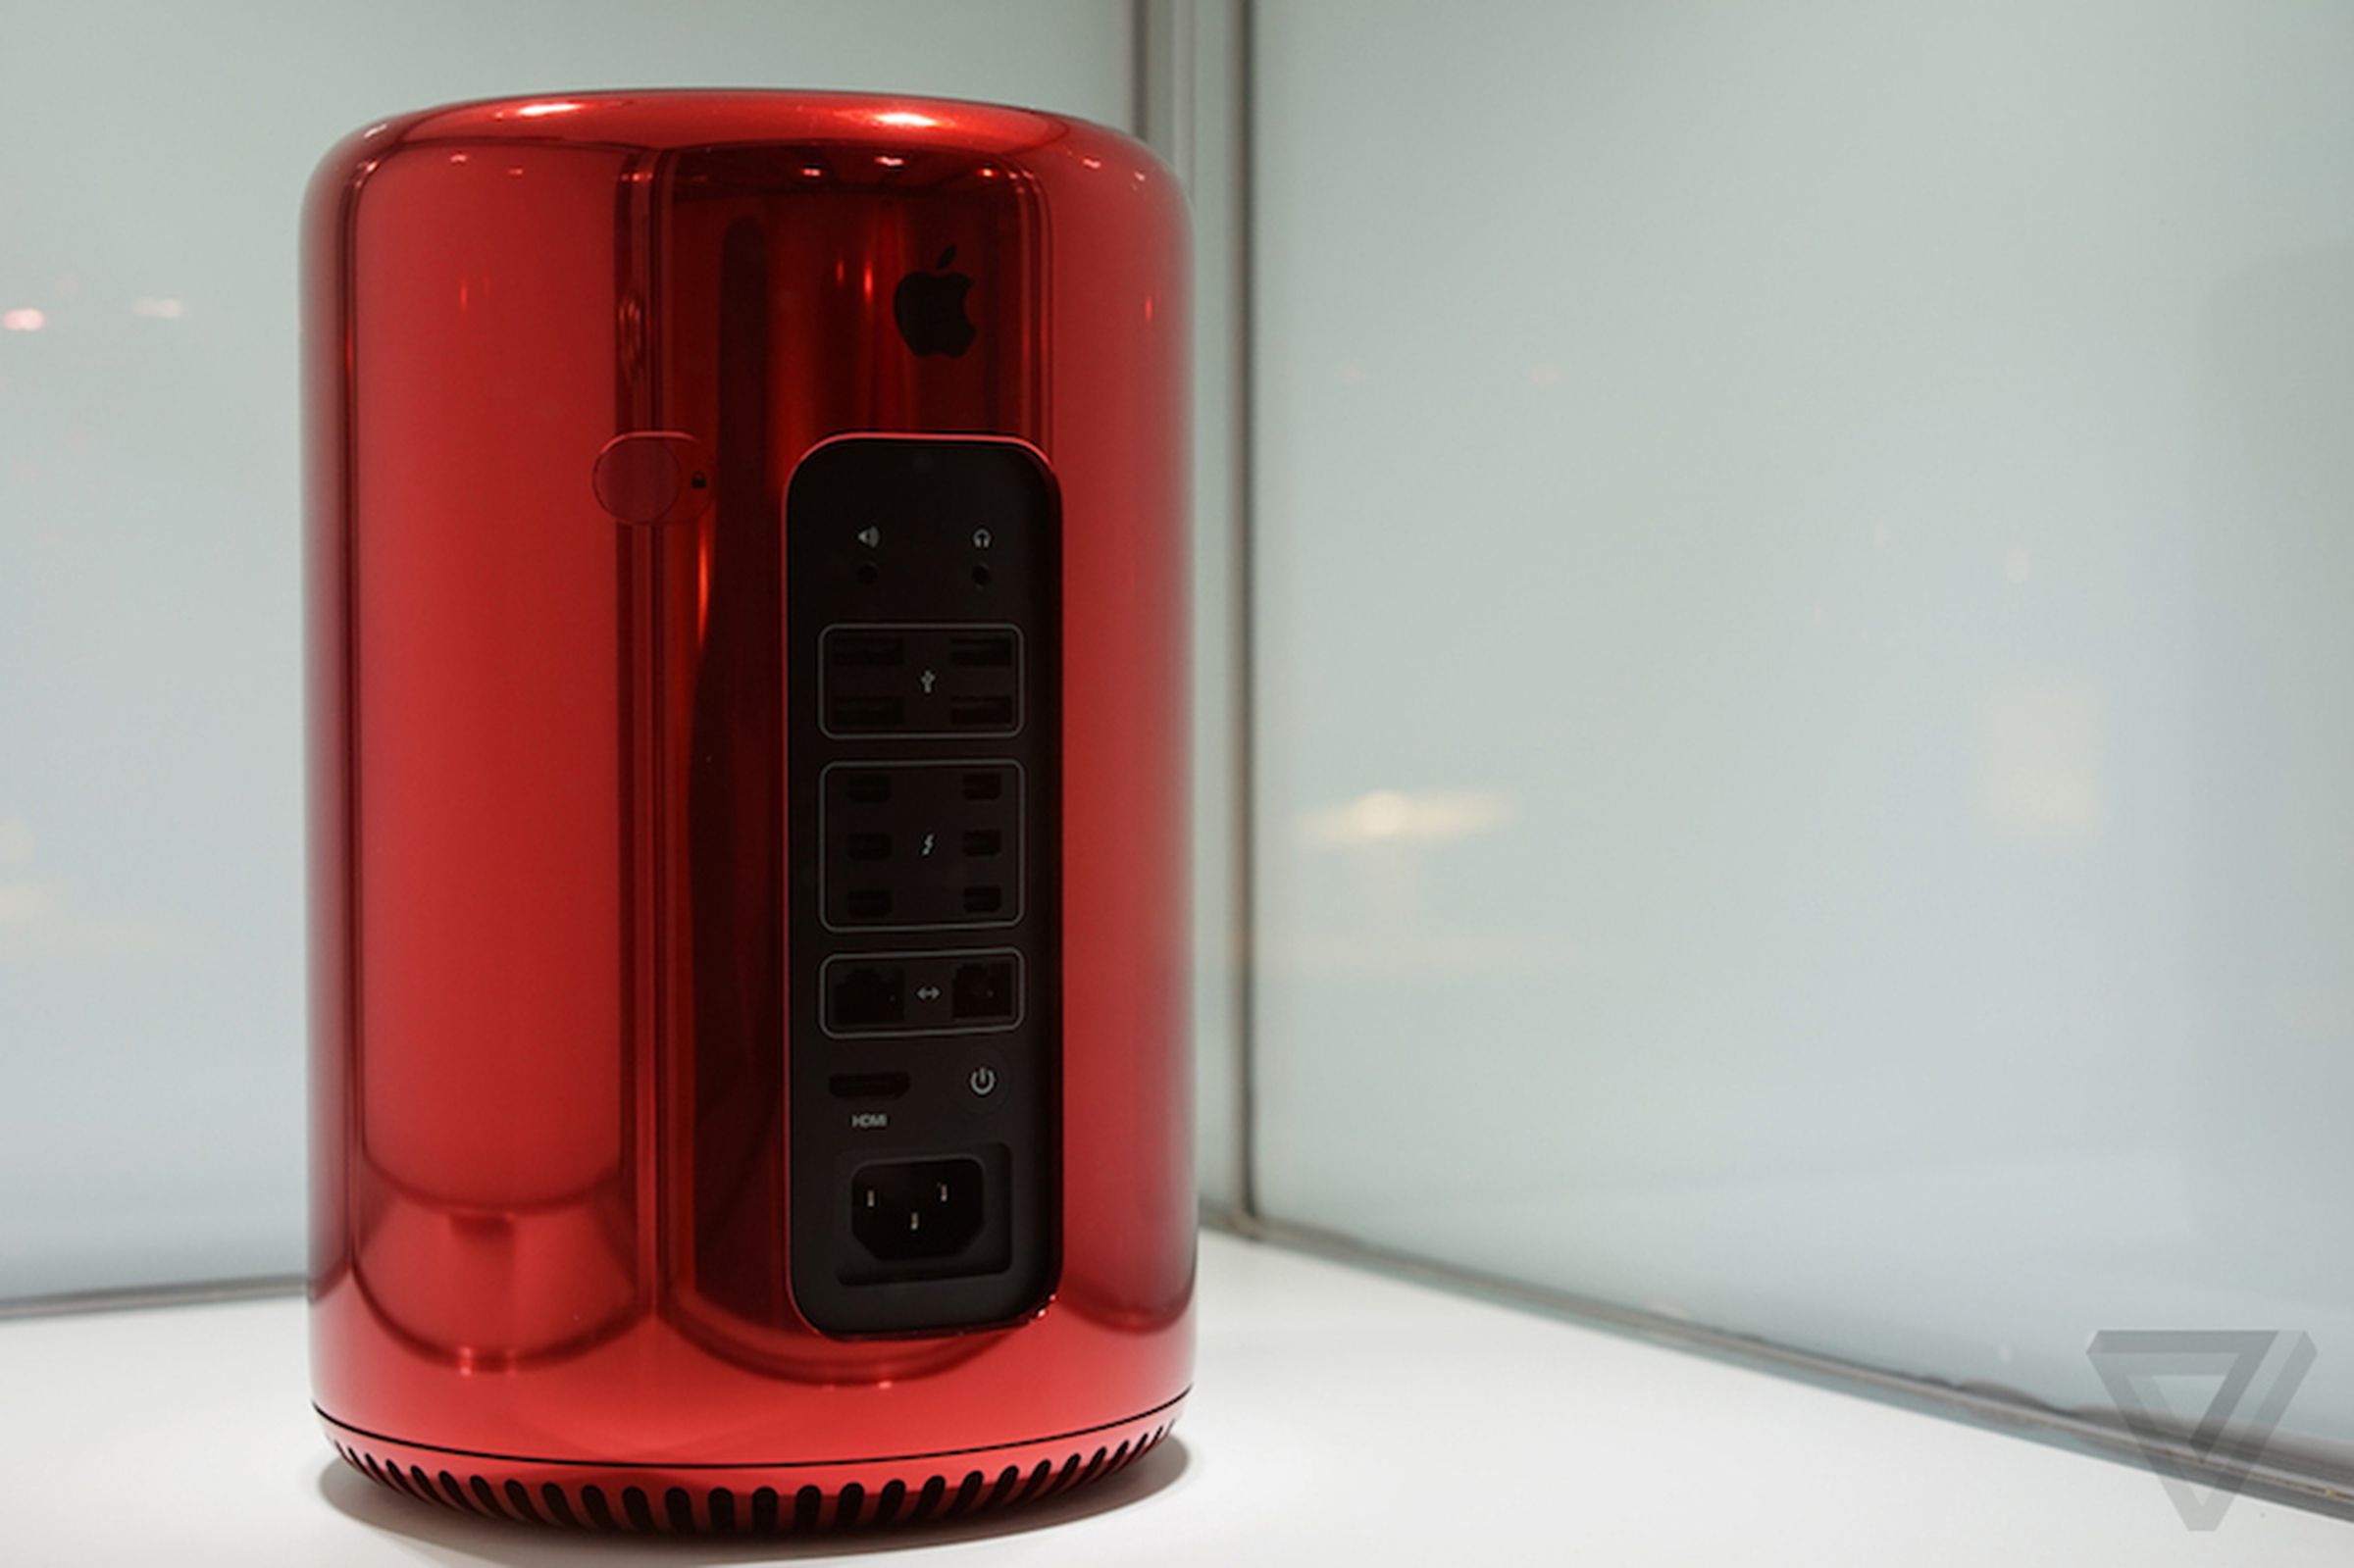 Jony Ive and Marc Newson's Red Auction at Sotheby's